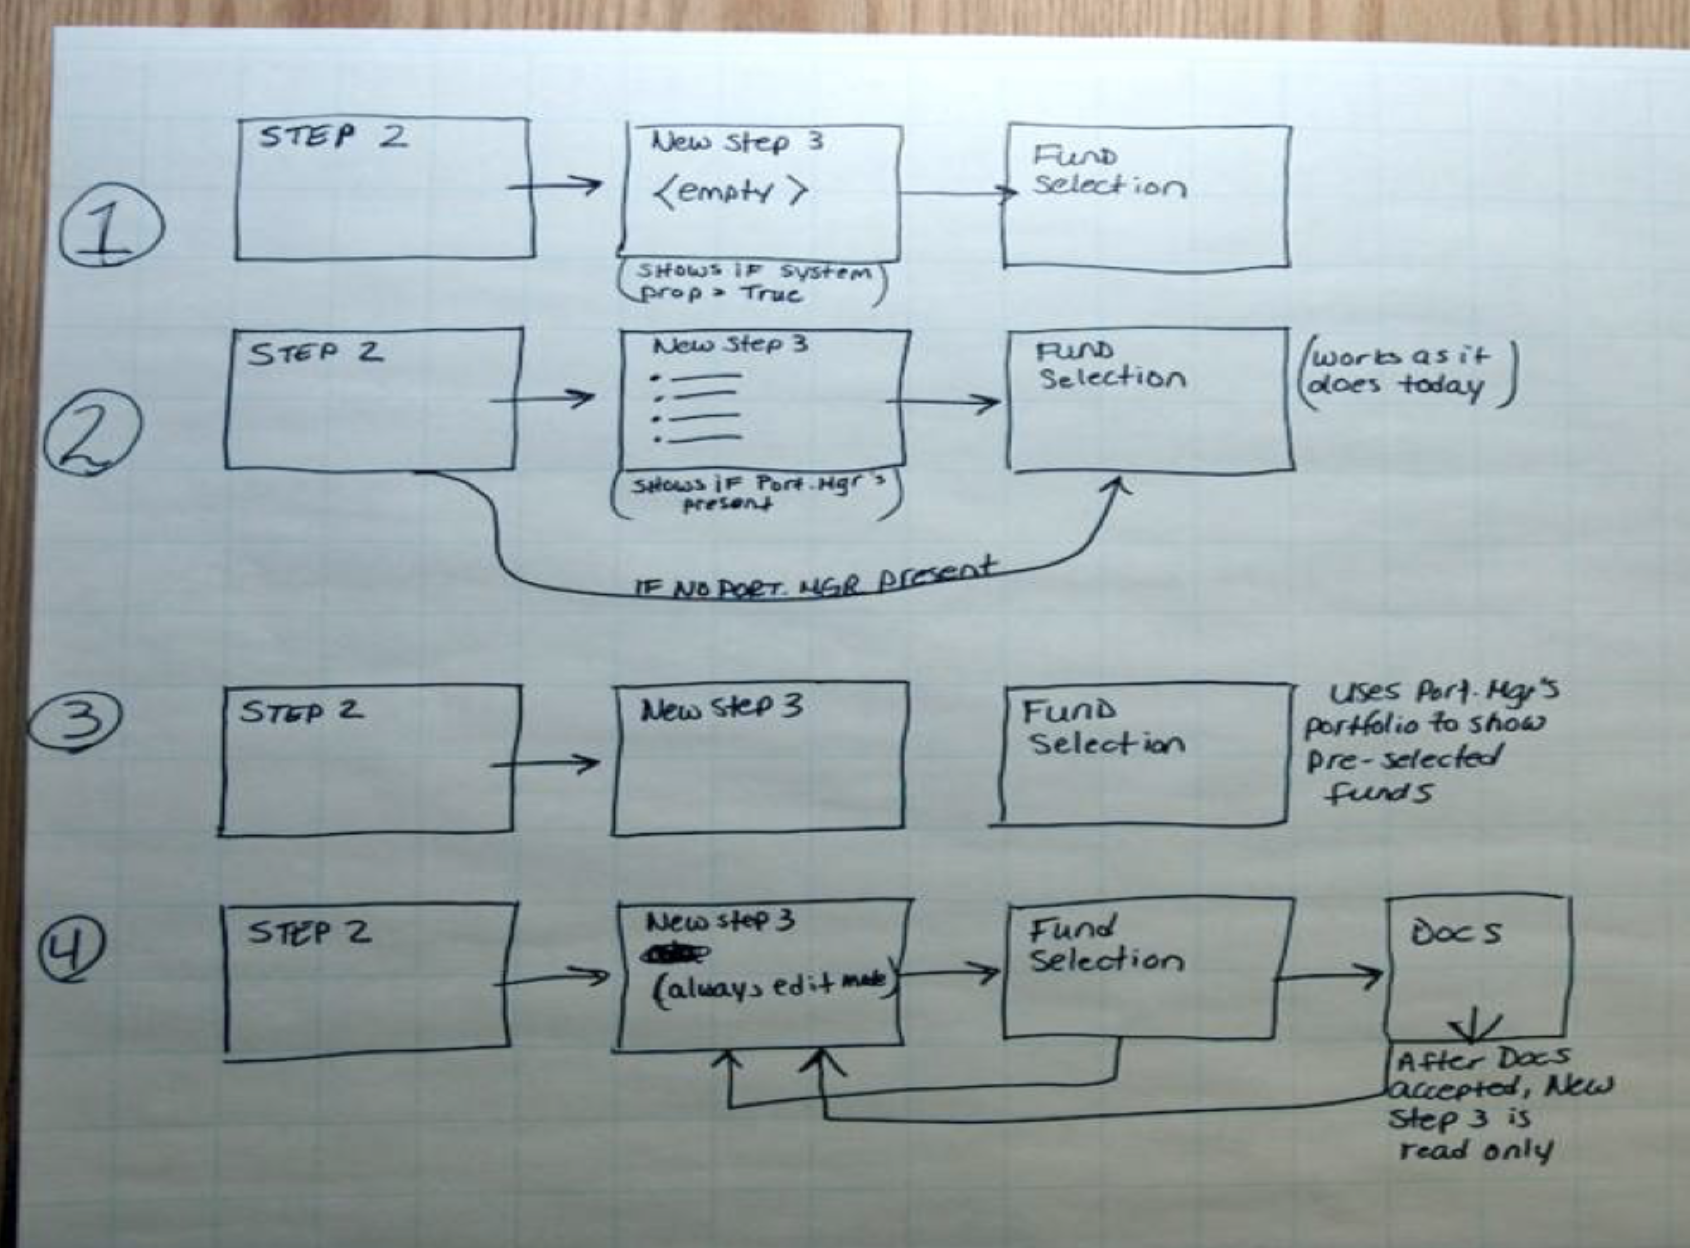 A piece of paper showing the process of building features incrementally in agile development.